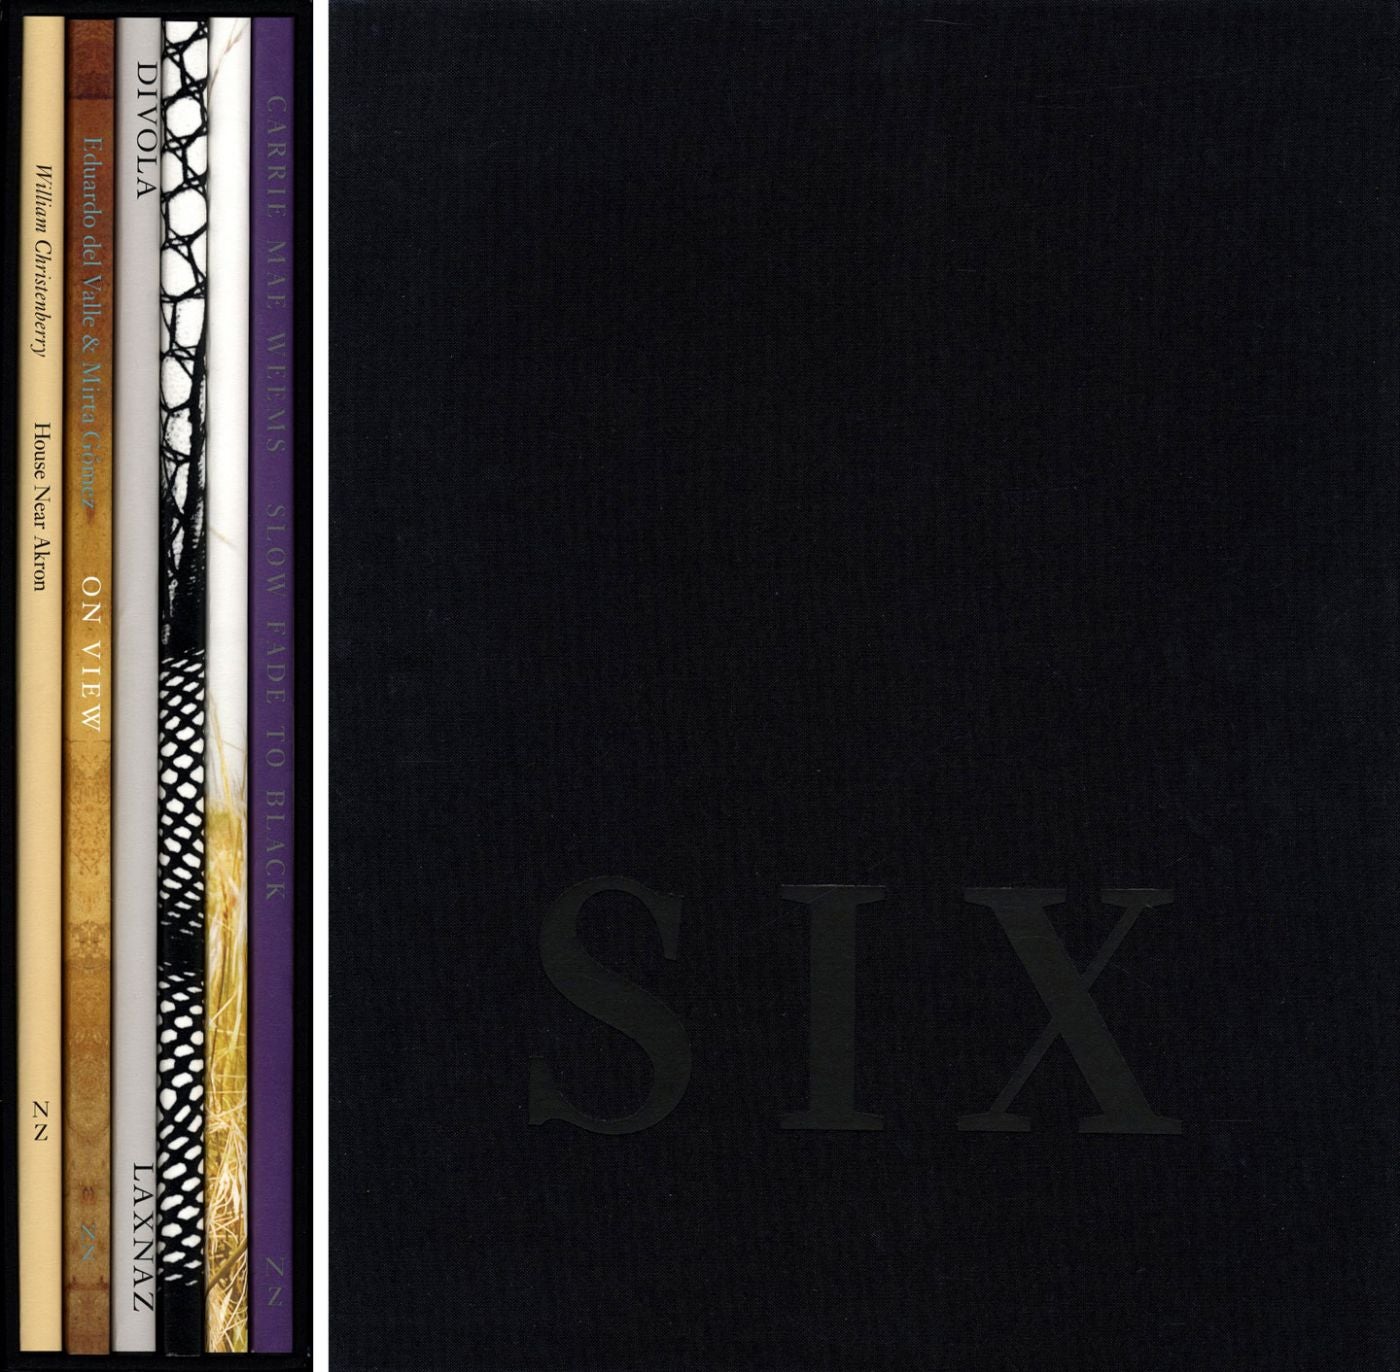 Nazraeli Press Six by Six (6 x 6) Subscription Series: Set 3 (of 6), Limited Edition (with 6 Prints): William Christenberry: House Near Akron; Eduardo del Valle & Mirta Gómez: On View; John Divola: LAX NAZ: Los Angeles International Airport Noise Abatement Zone (Exterior Views), 1975; Daido Moriyama: Fishnet; Karin Apollonia Müller: Timber Cove; Carrie Mae Weems: Slow Fade to Black